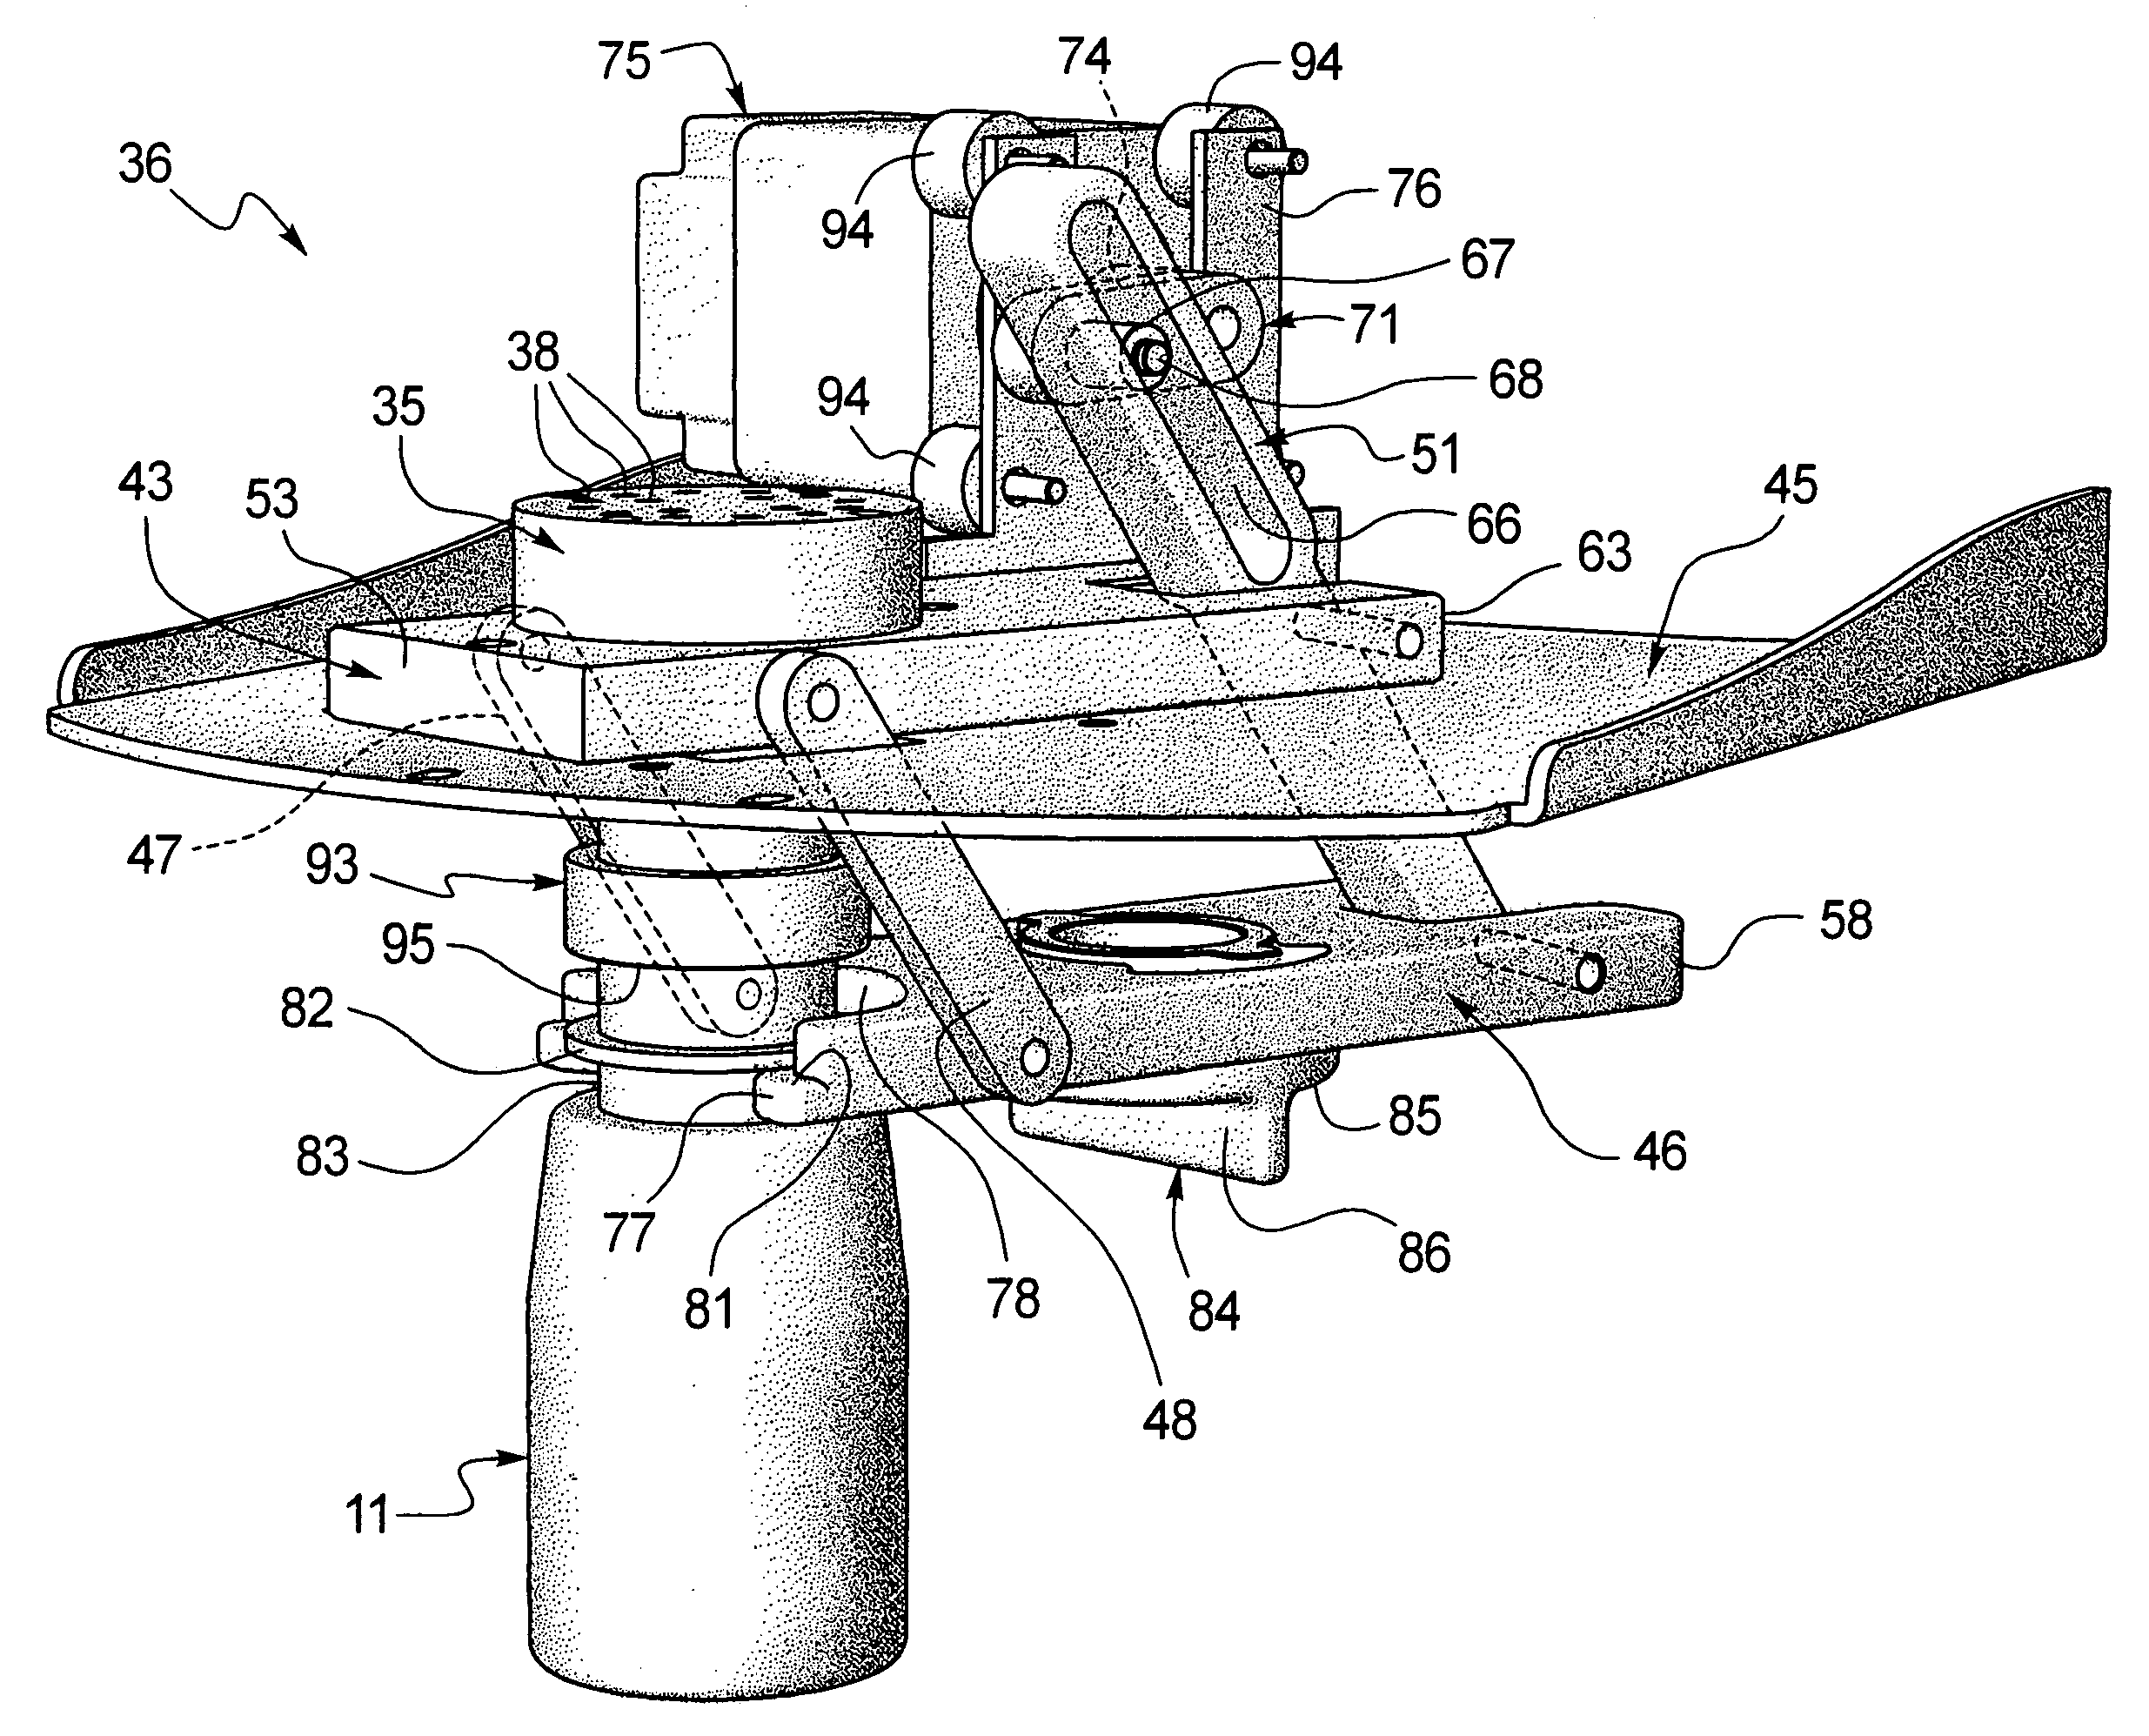 Apparatus for dispensing paint and stain samples and methods of dispensing paint and stain samples